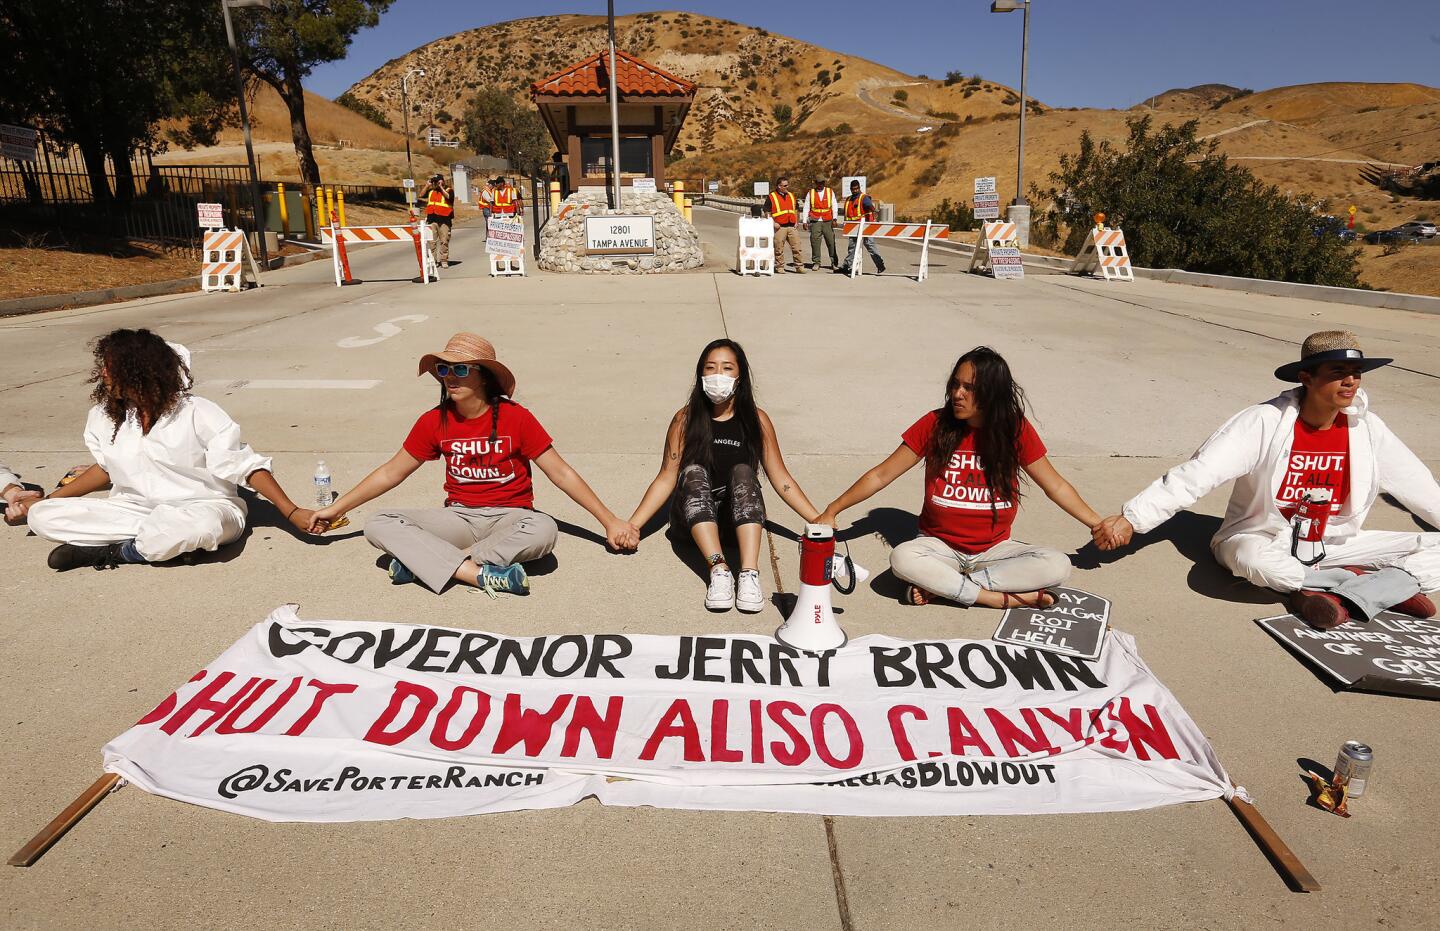 About 50 protesters and residents staged a sit-in at the Southern California Gas Co. Aliso Canyon facility in Porter Ranch on Monday, marking the two-year anniversary of a gas leak.